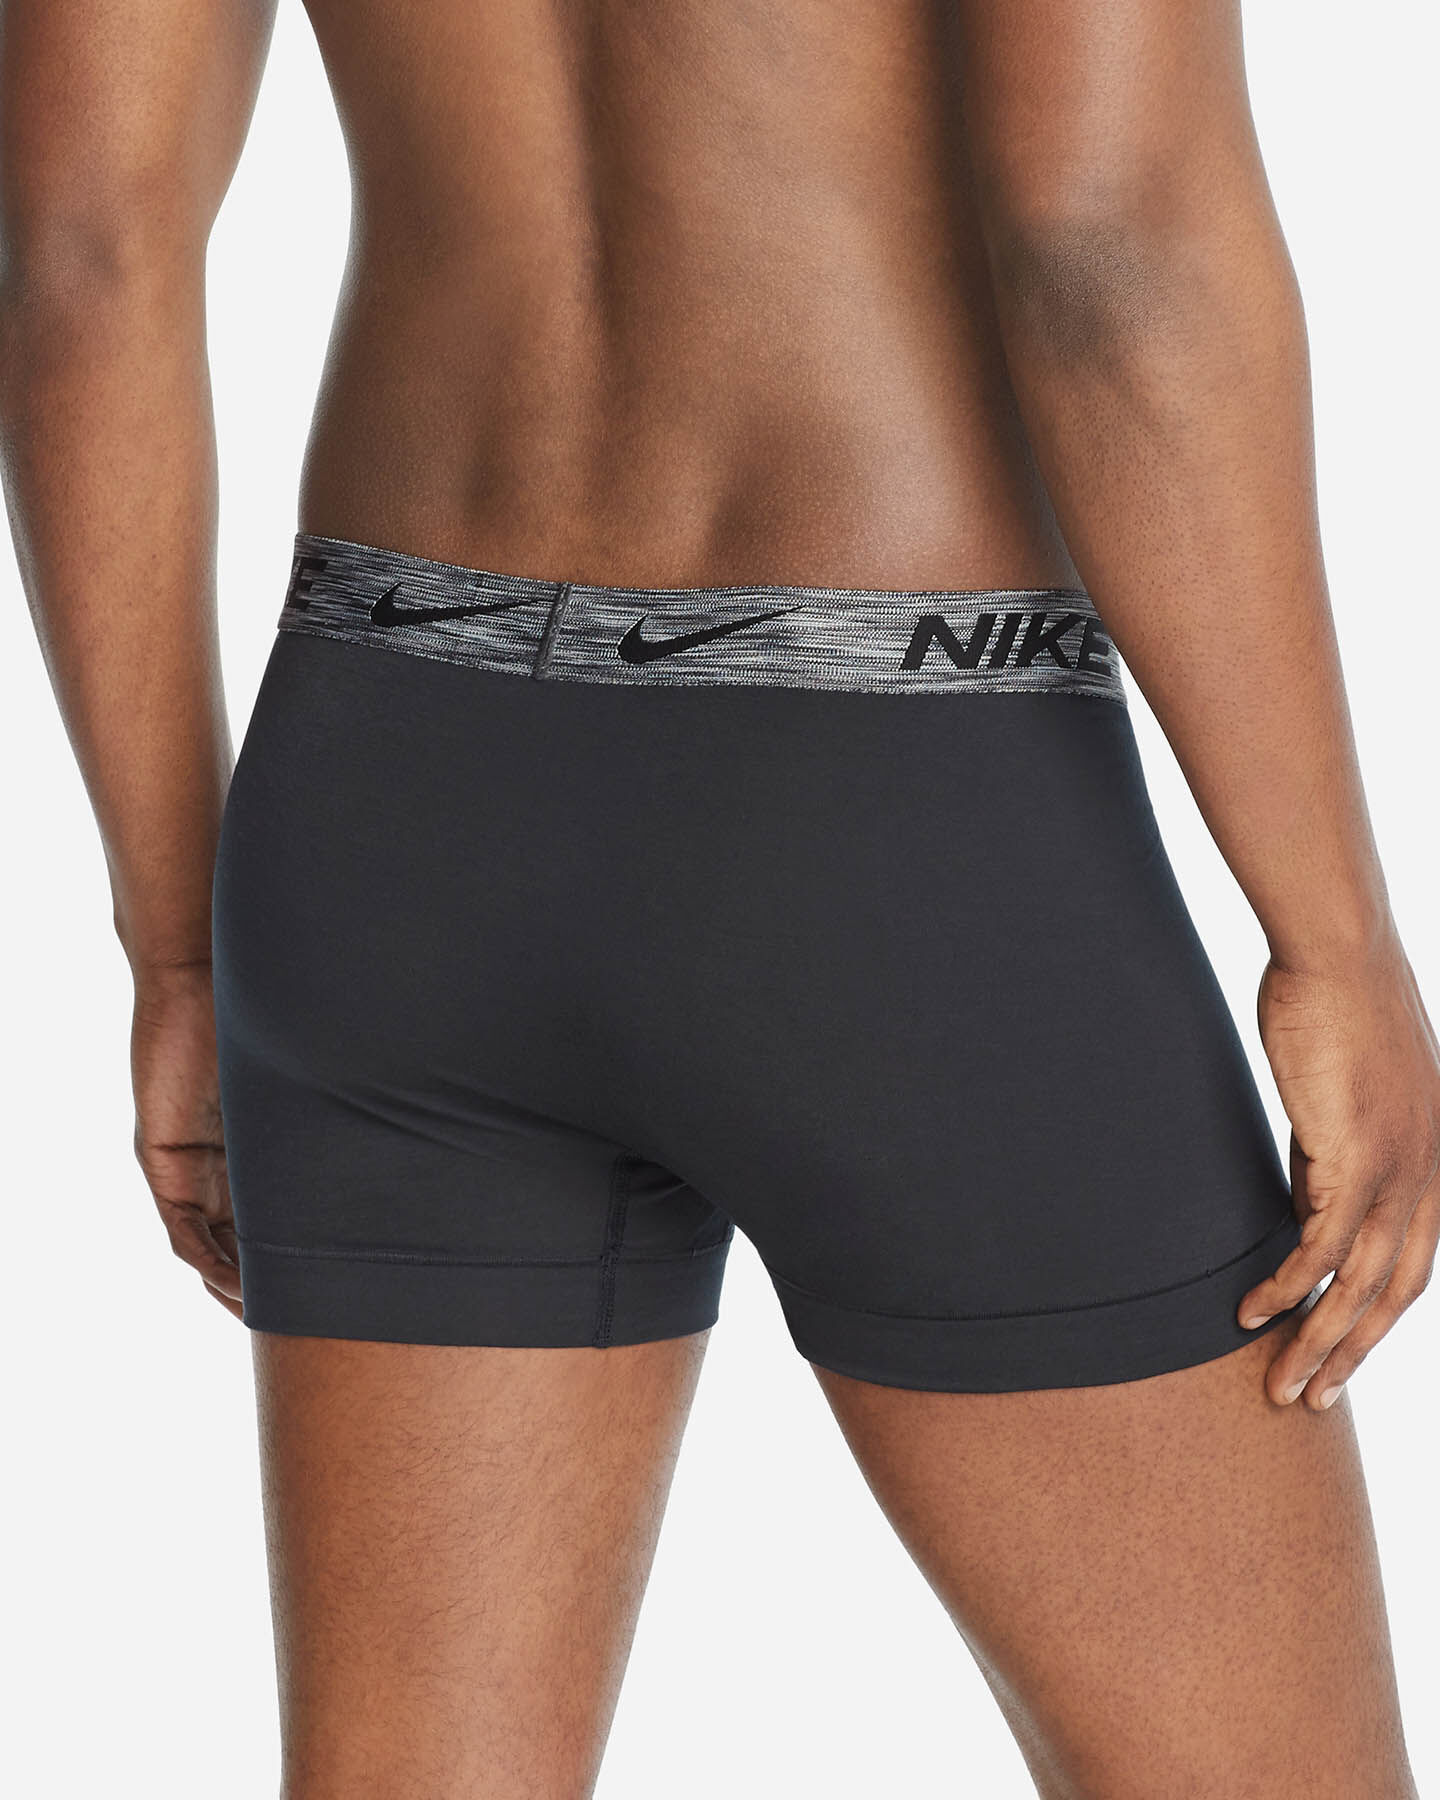  Intimo NIKE 2PACK BOXER RELUX M S4099896|UB1|S scatto 3